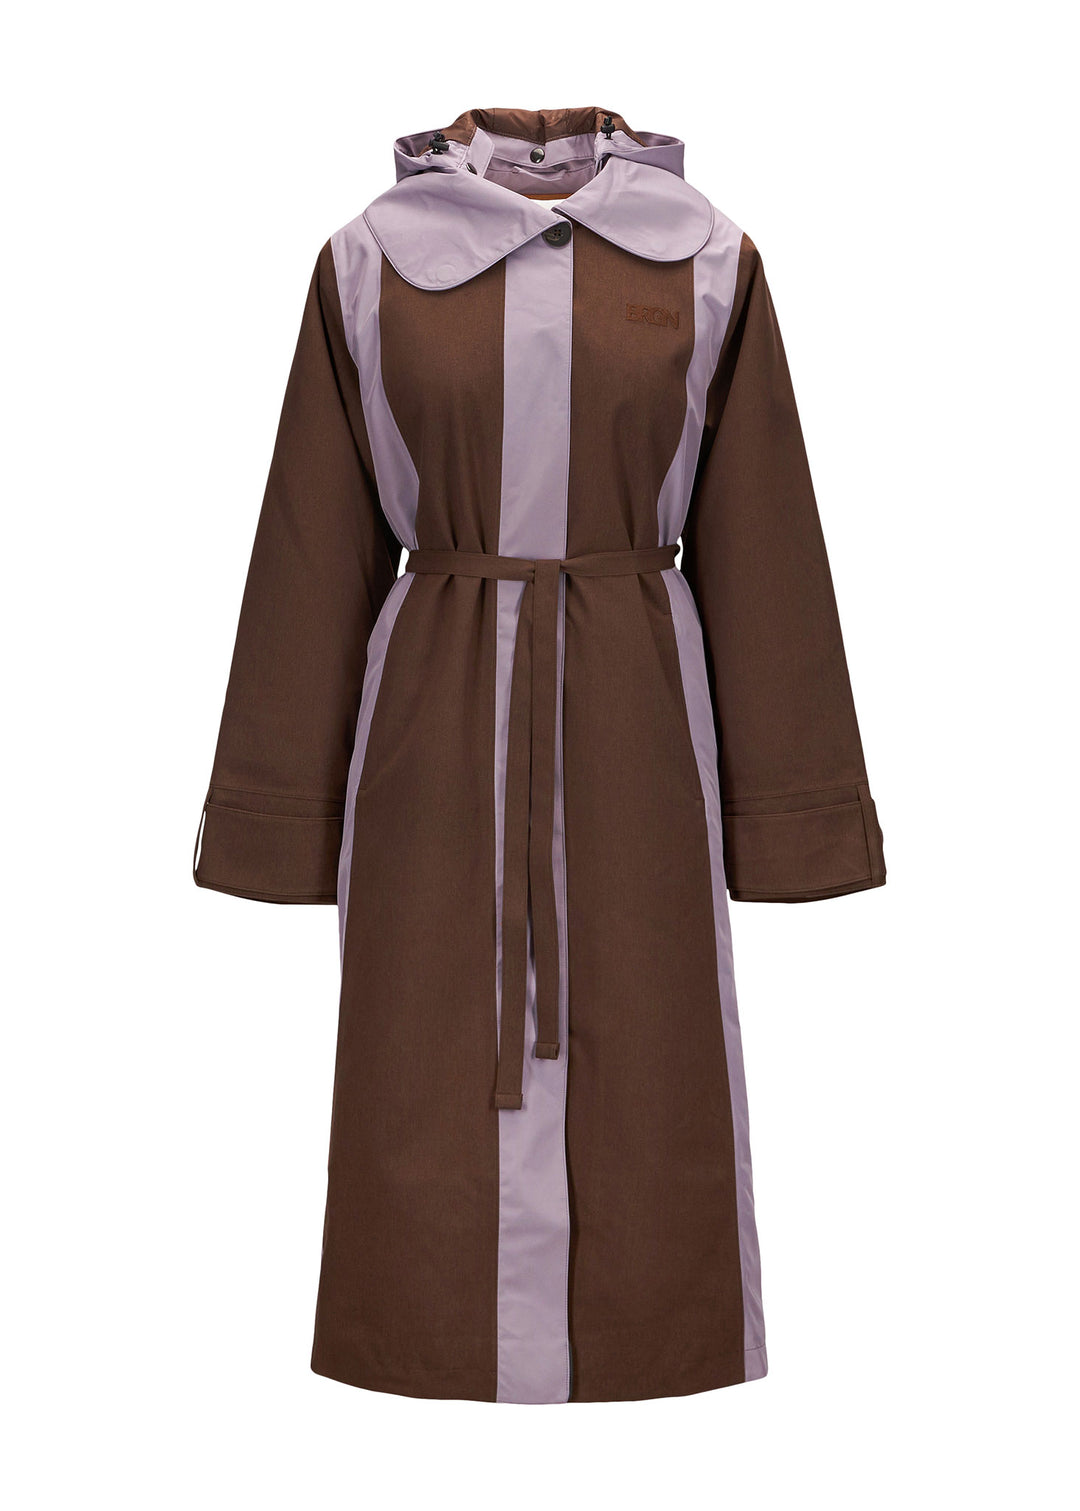 BRGN by Lunde & Gaundal Cloudy kontrast kåpe Coats 187 Chocolate Brown / 700 Lilac